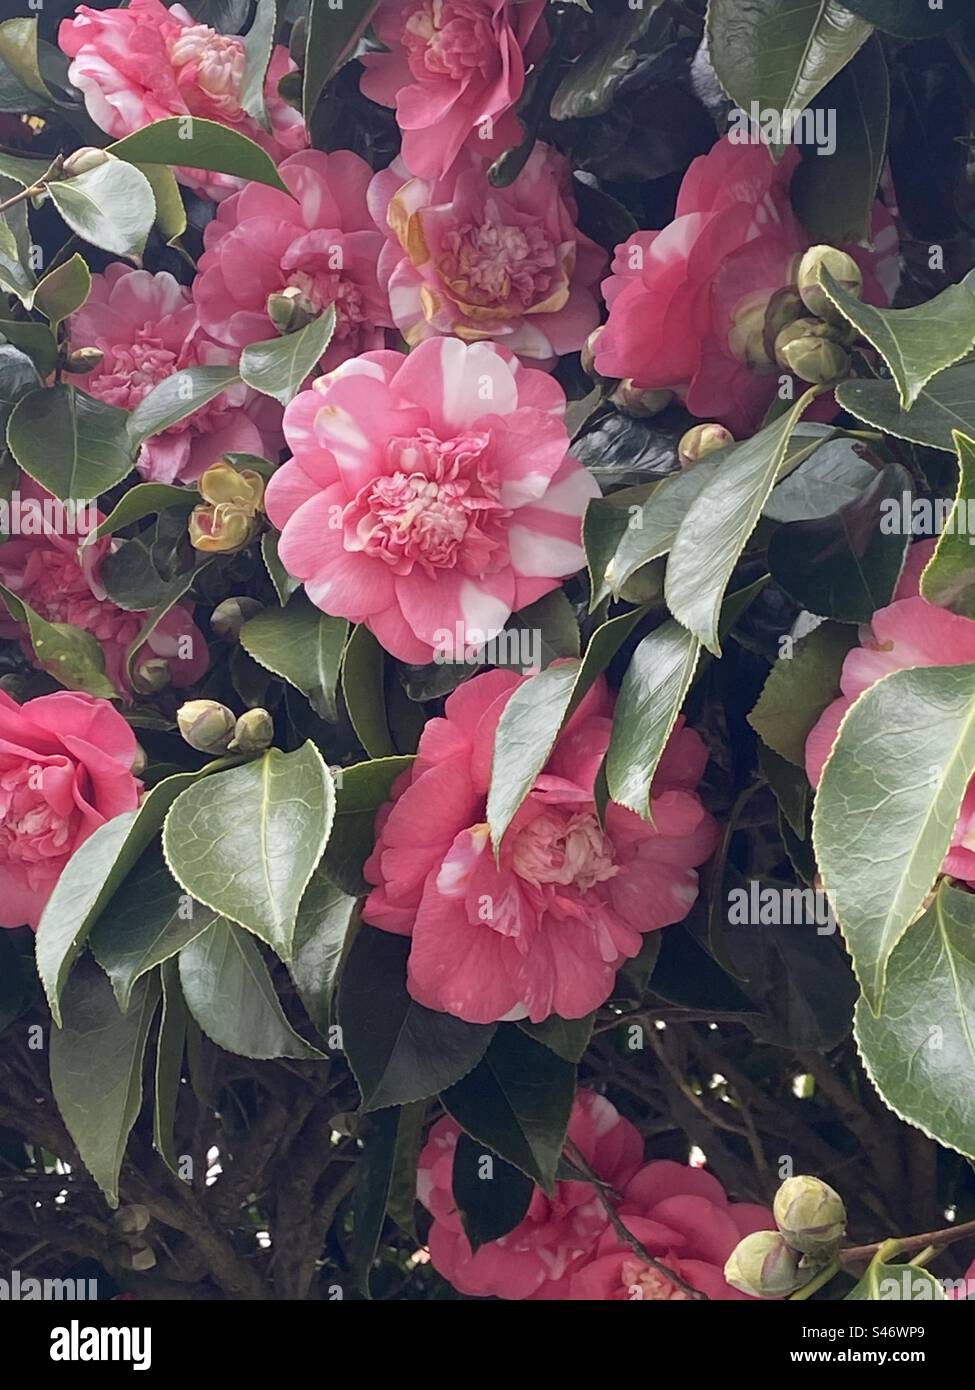 Camellias in bloom Stock Photo